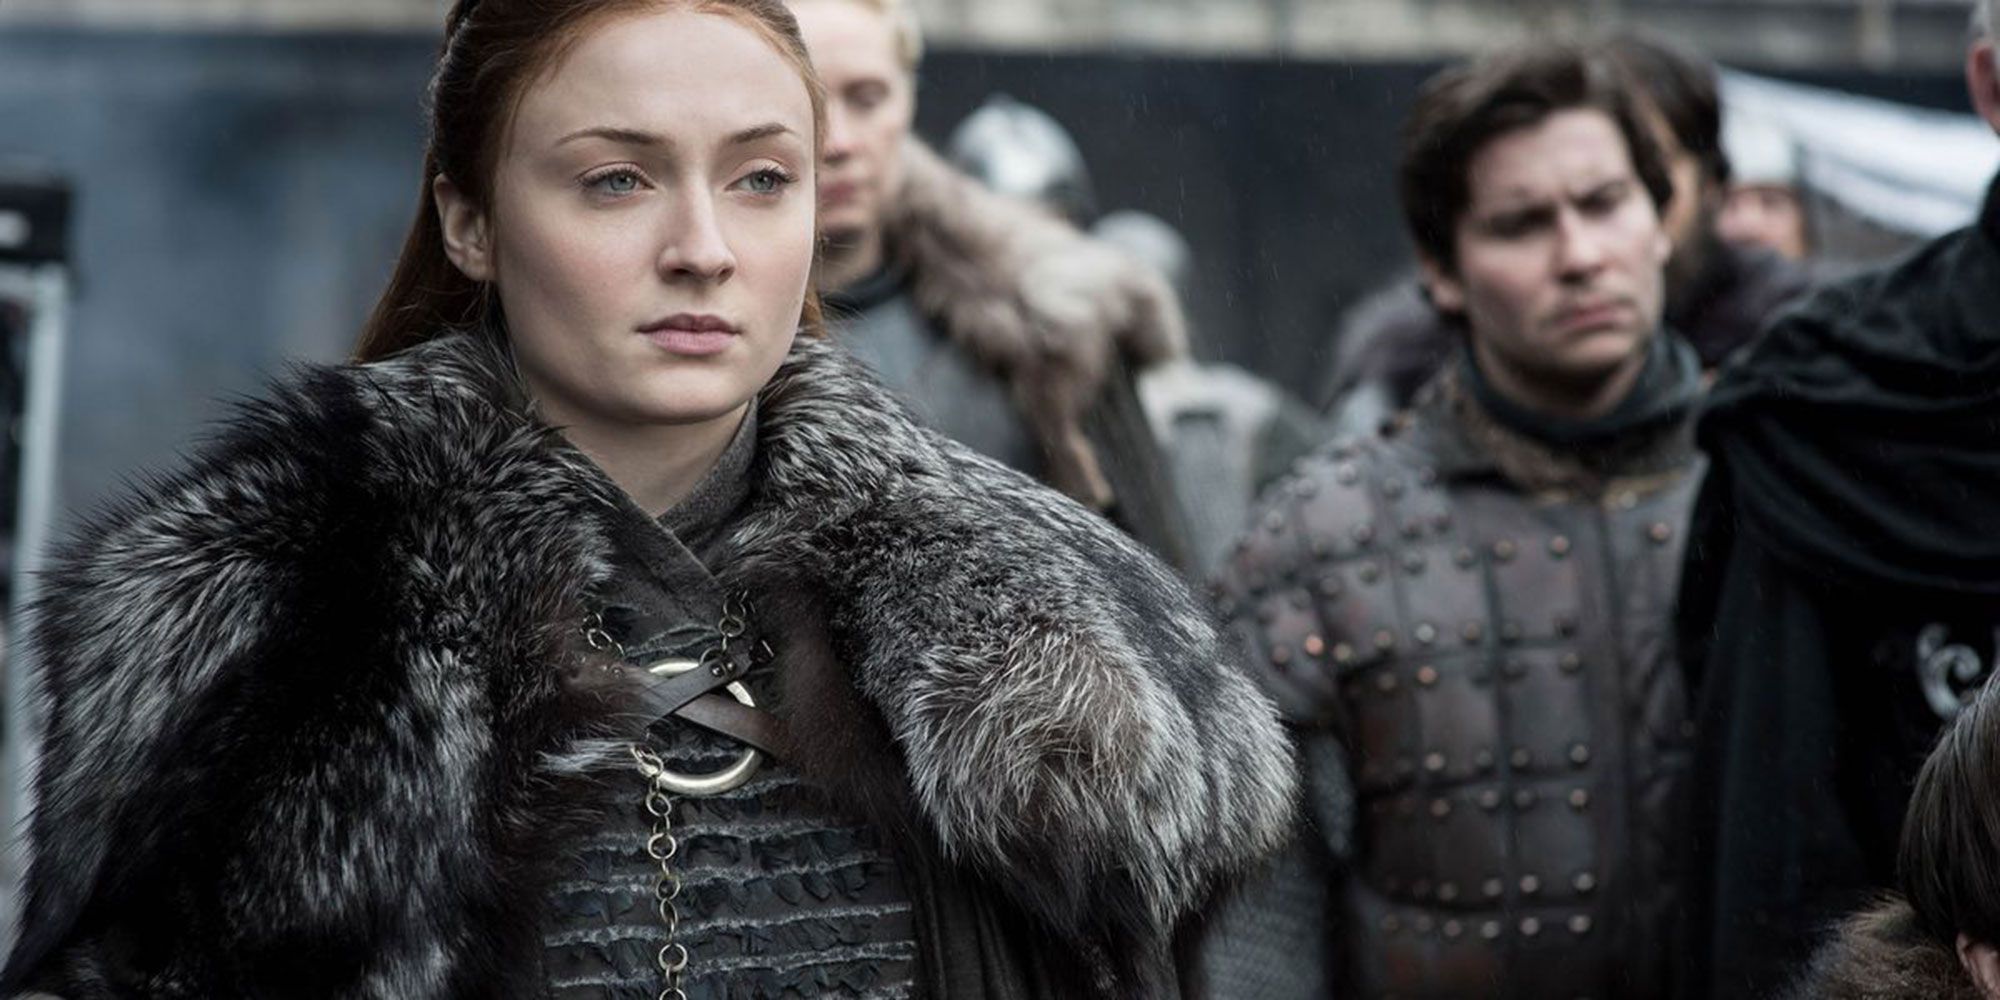 Choose Some 📺 TV Shows to Watch All Day and We’ll Guess Your Age With 99% Accuracy Sansa Stark